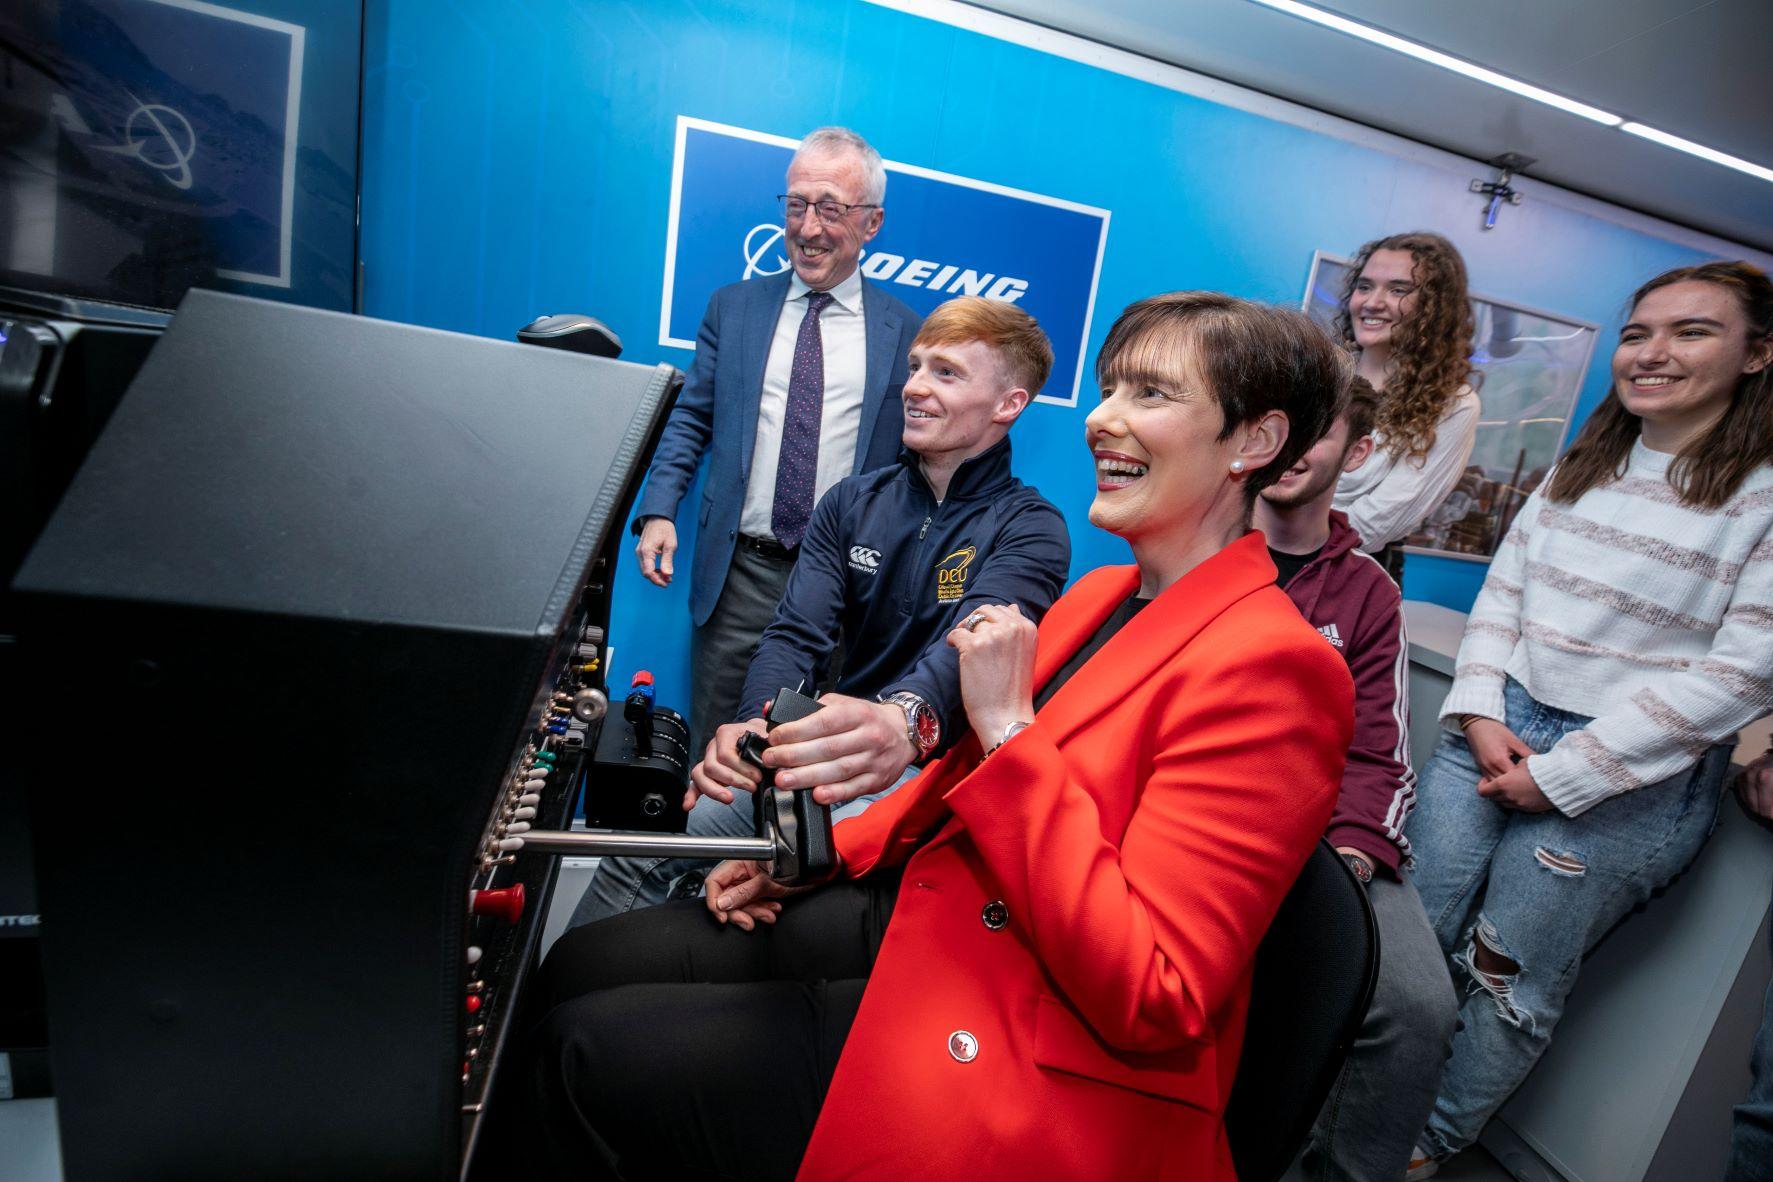 In Dublin City University today, Minister for Education Norma Foley TD  joined students to launch Ireland’s first Mobile Newton Room - a state-of-the-art STEM classroom that features three professional flight simulator.